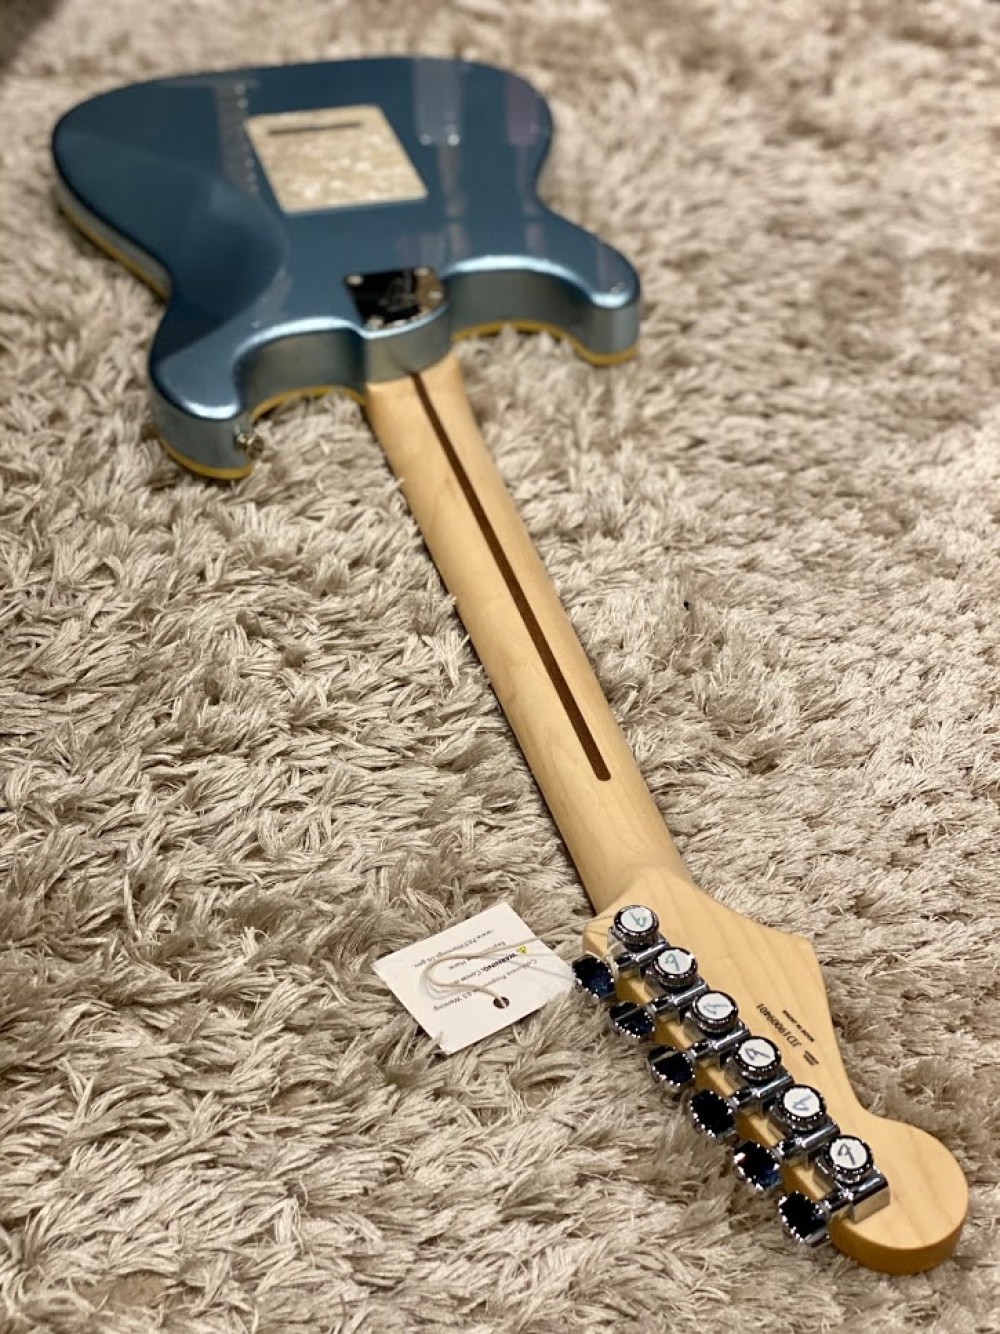 Fender Japan Modern HSS Stratocaster in Ice Blue Metallic with